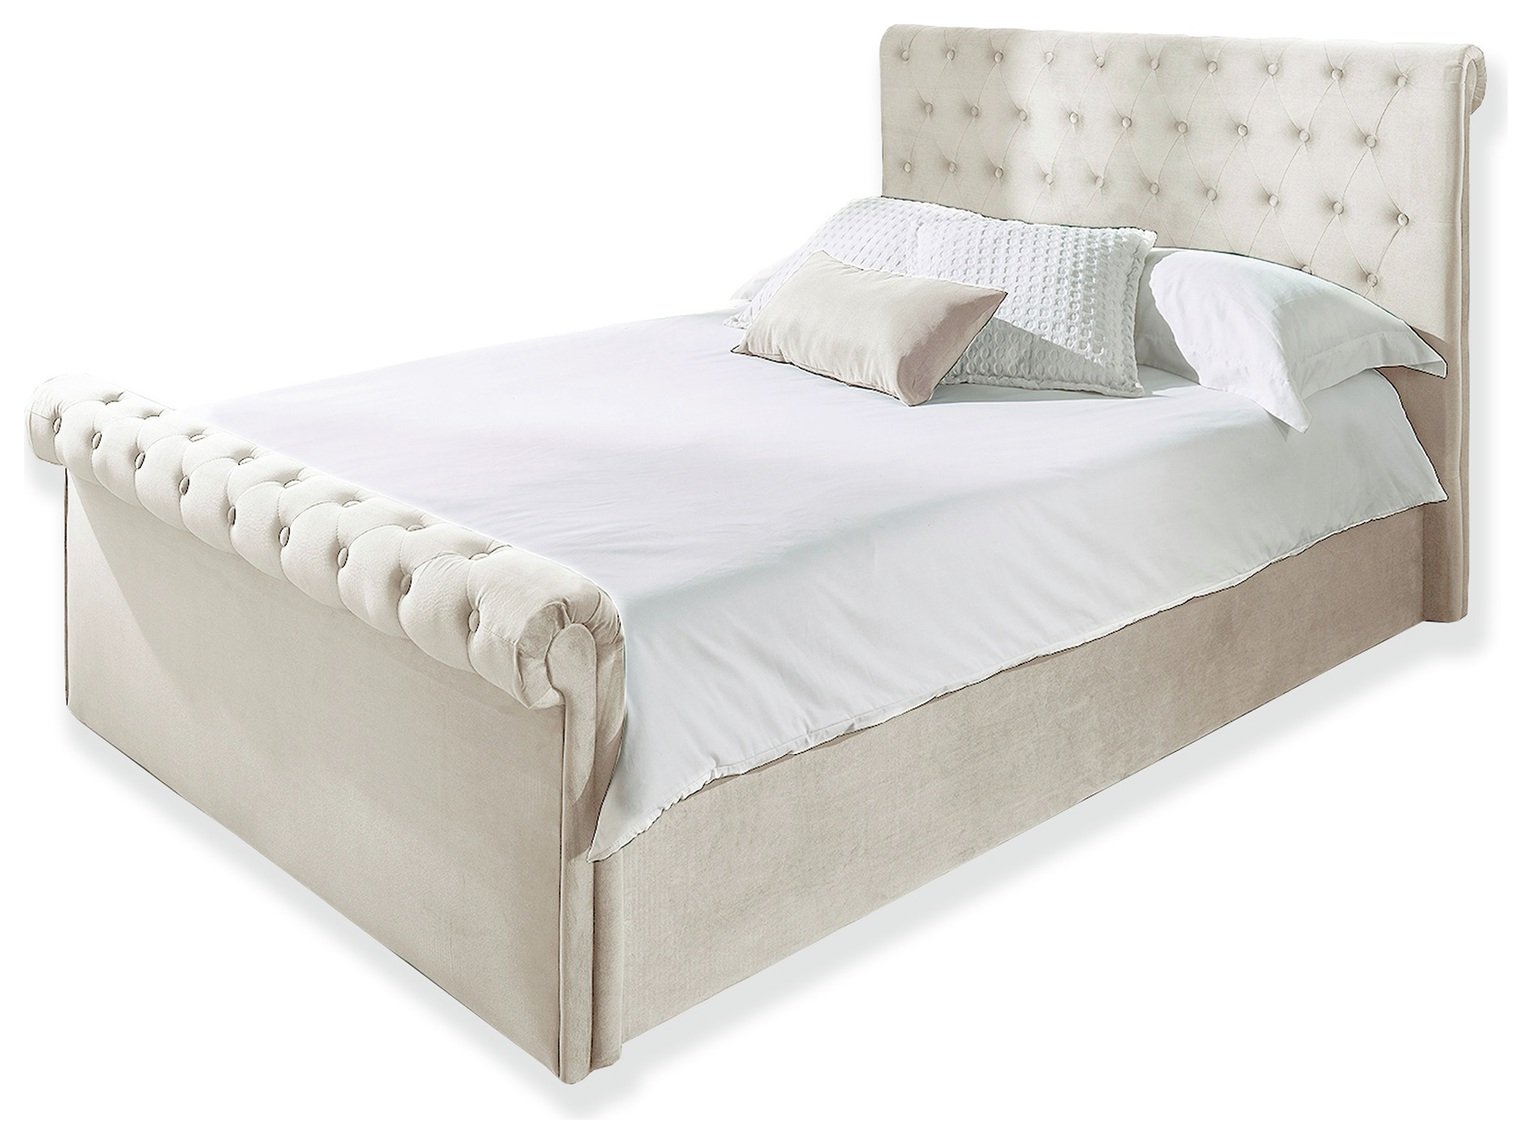 Aspire Chesterfield Small Double Ottoman Bed Frame - Natural